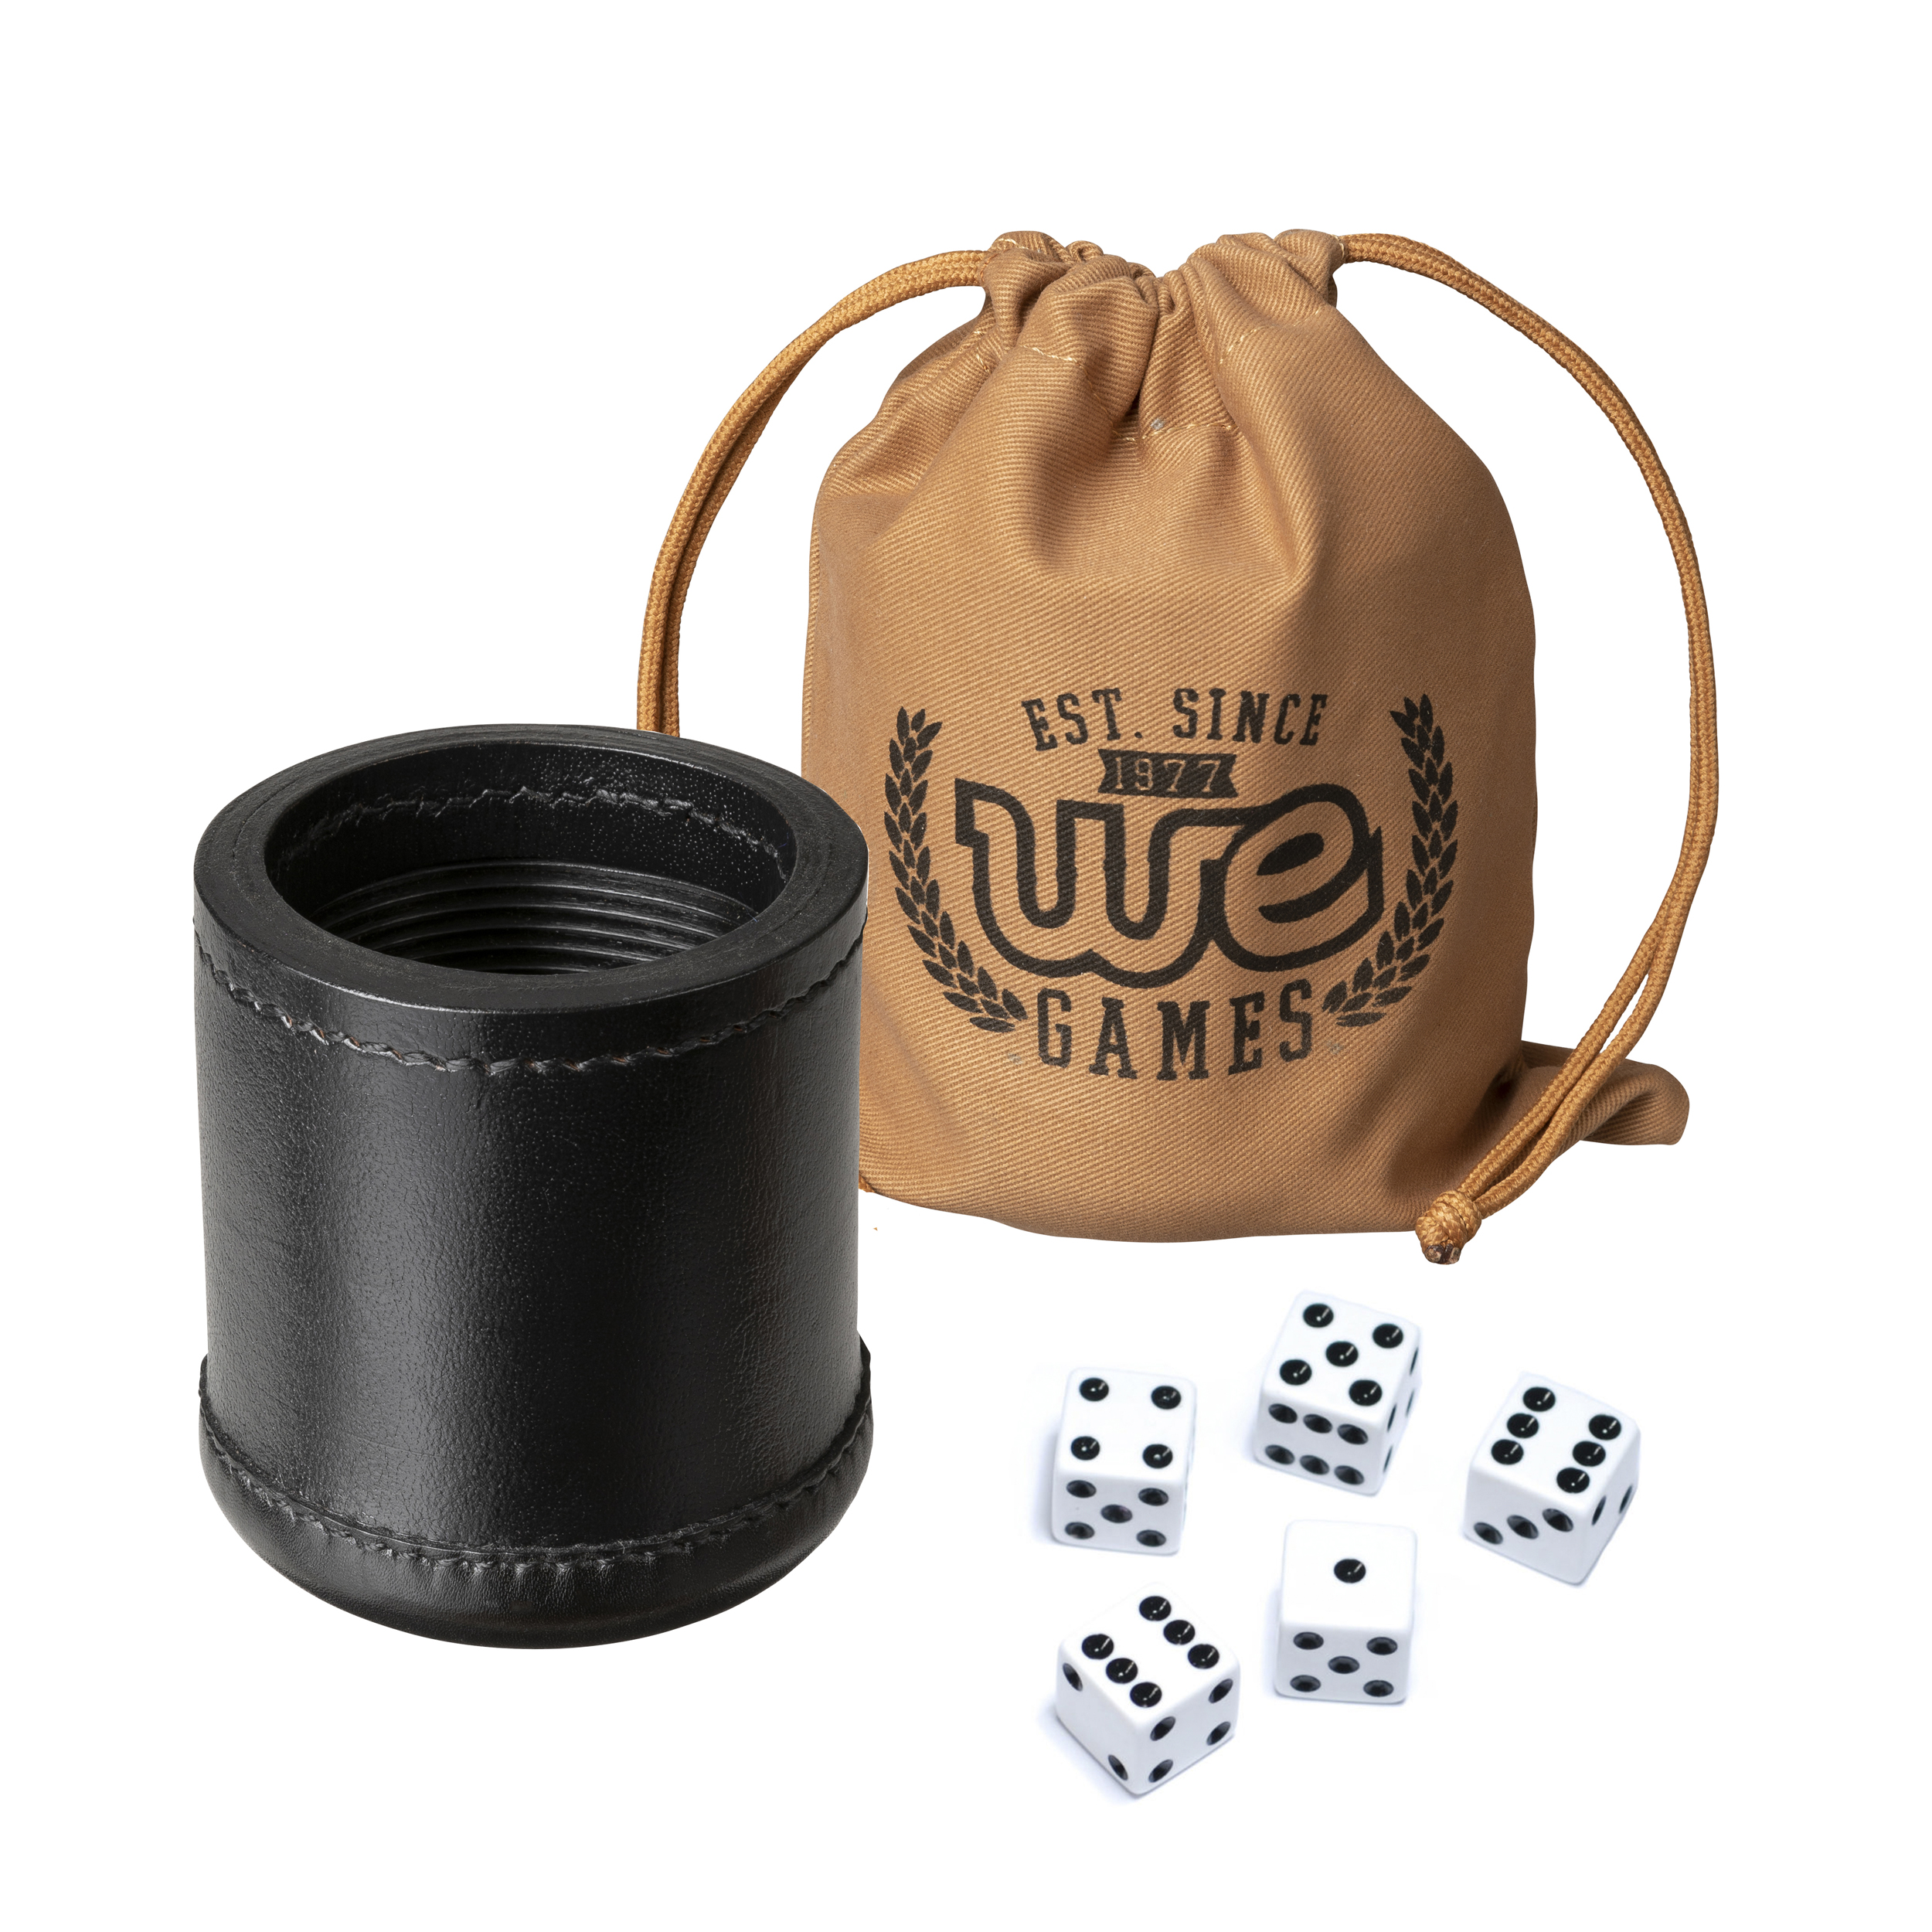 Dot Dice Ivory, Black/Grey Cup Pip Set of 16mm Poker / Pip Dice Rounded Corners and Black PU Leather Dice Cup Plush Velvet Lined Gift Boxed 